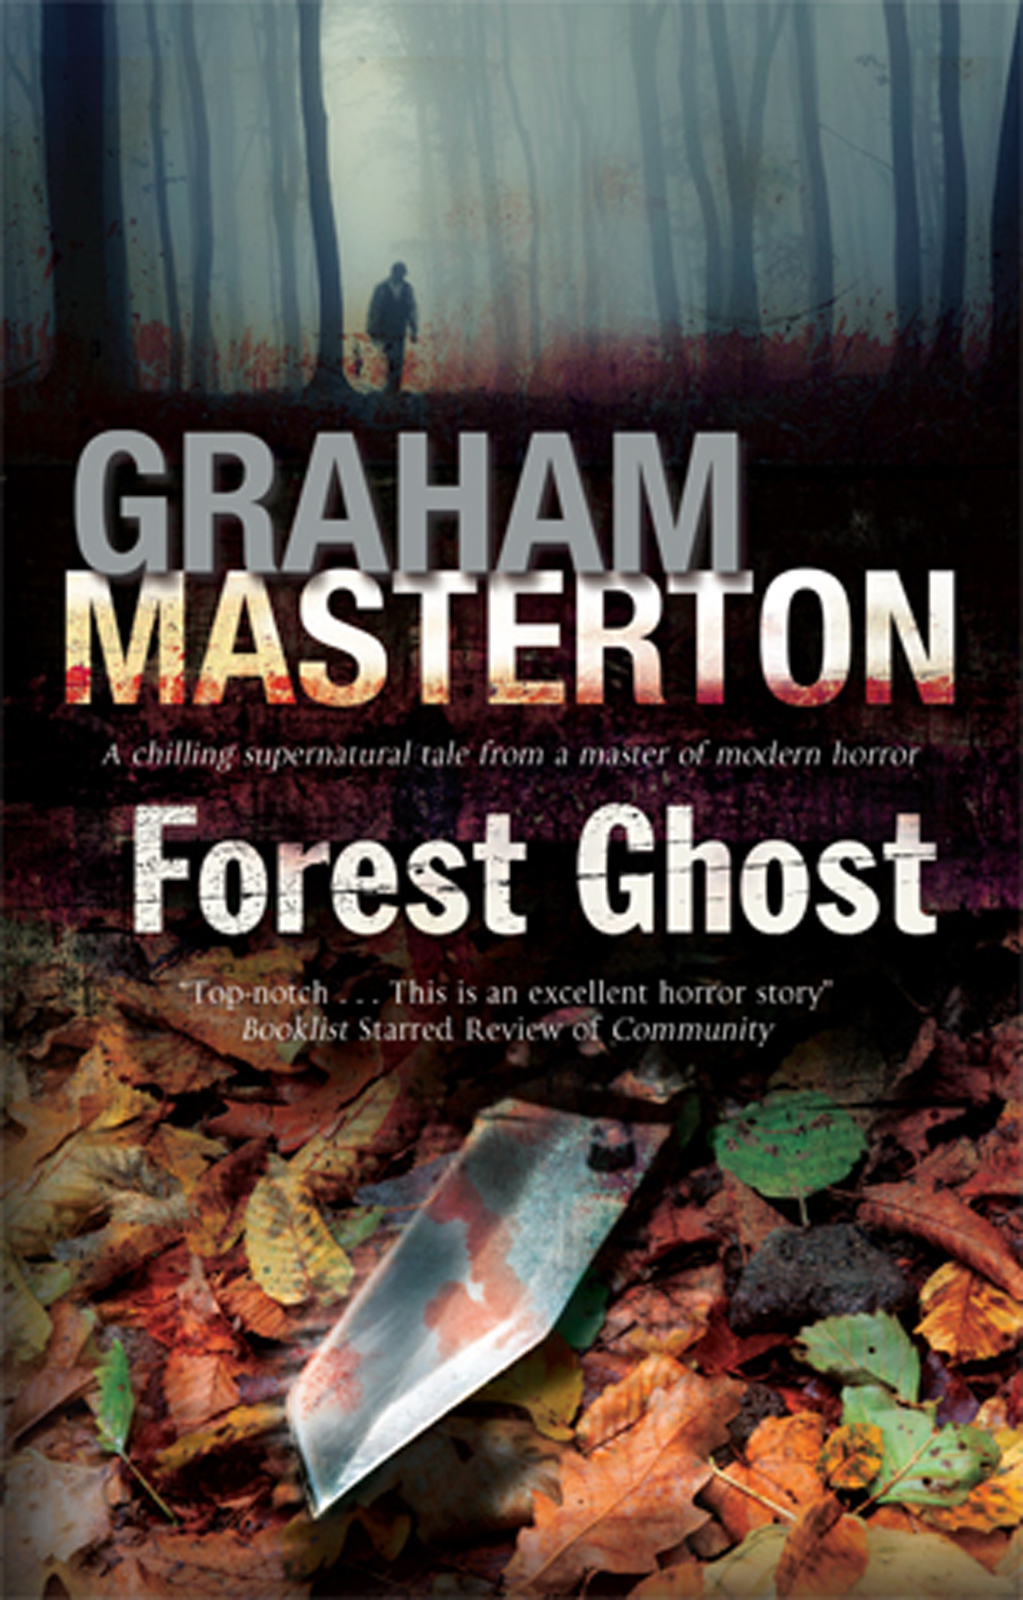 Forest Ghost (2013) by Graham Masterton